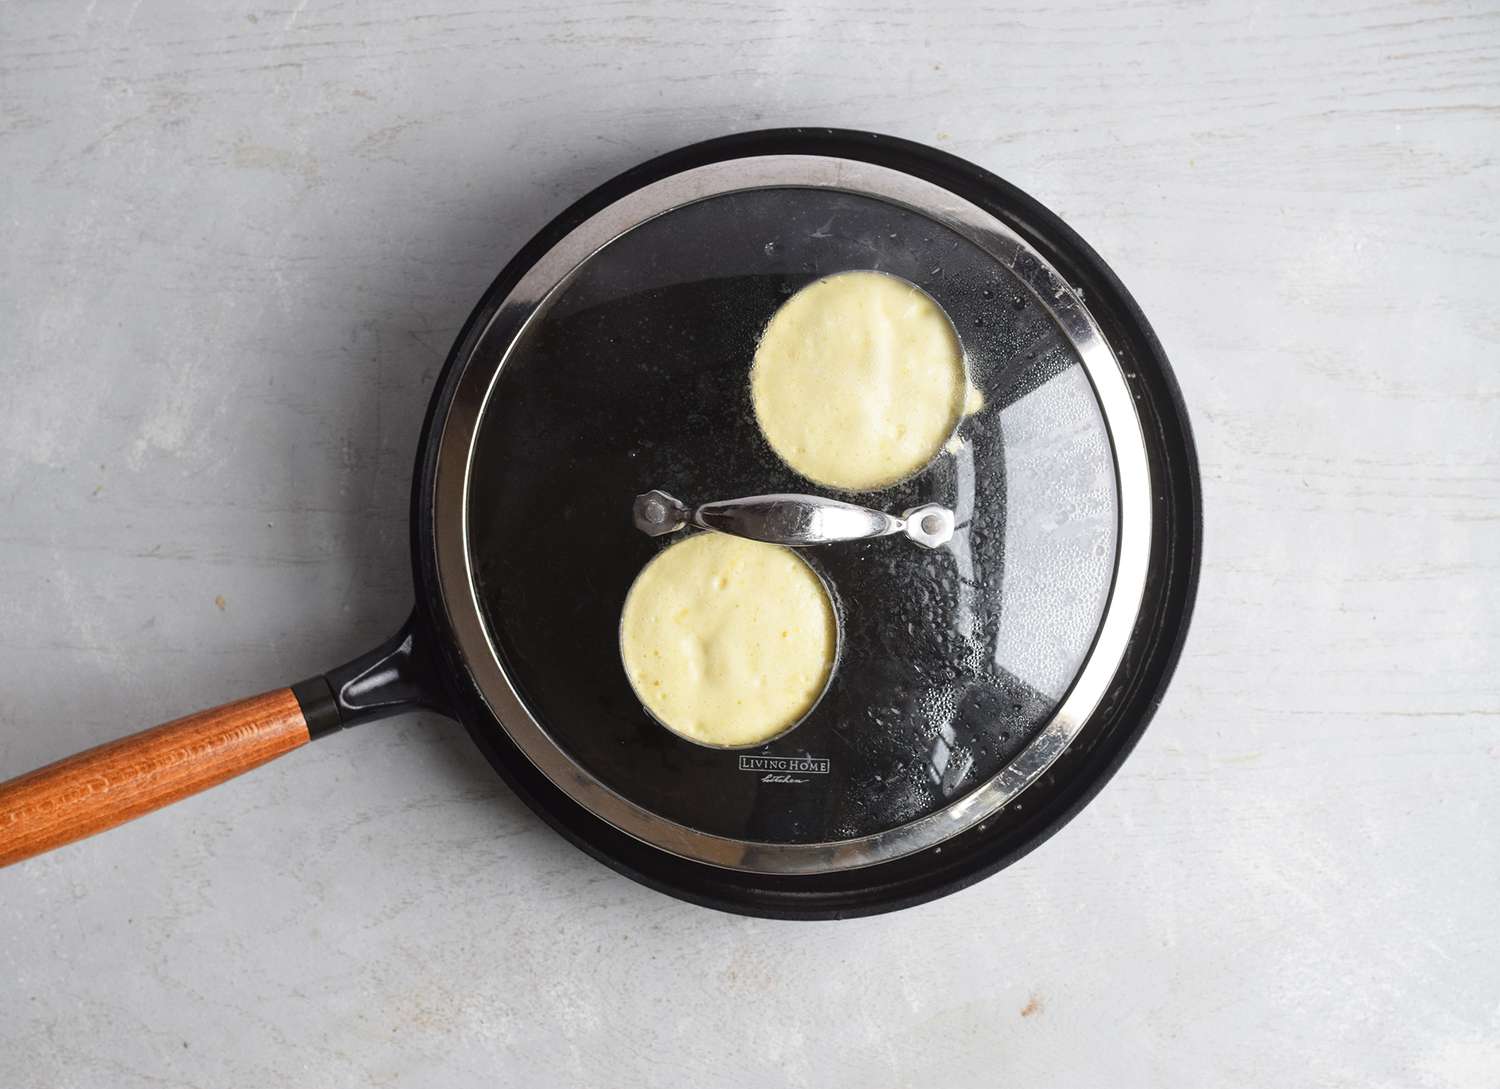 Japanese pancakes cooking on a skillet